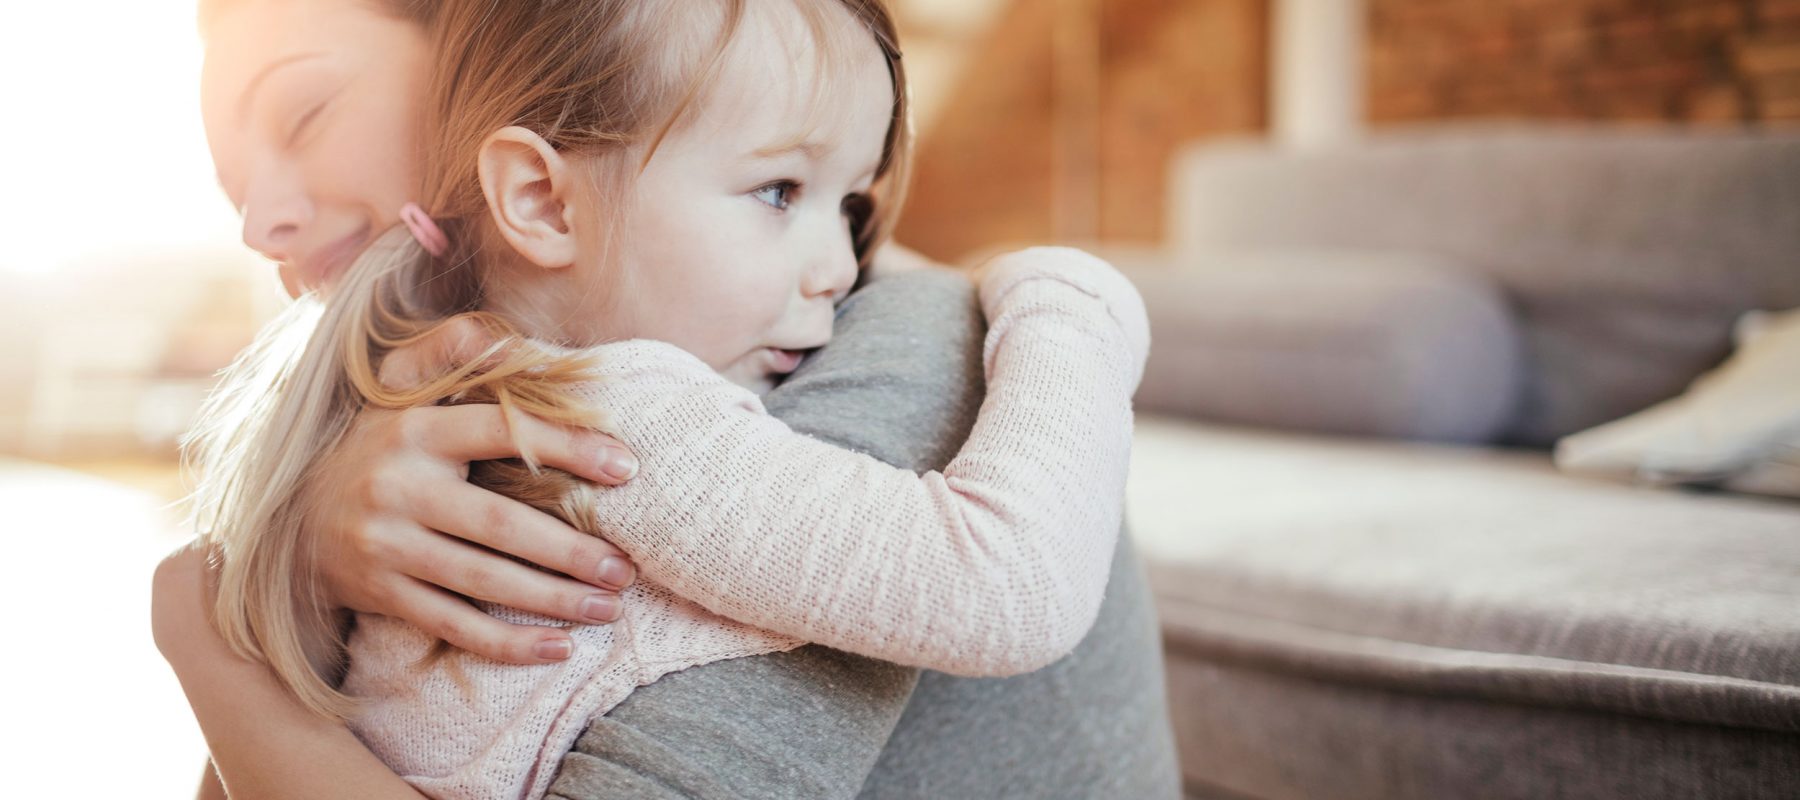 Helping Little Ones with Big Emotions